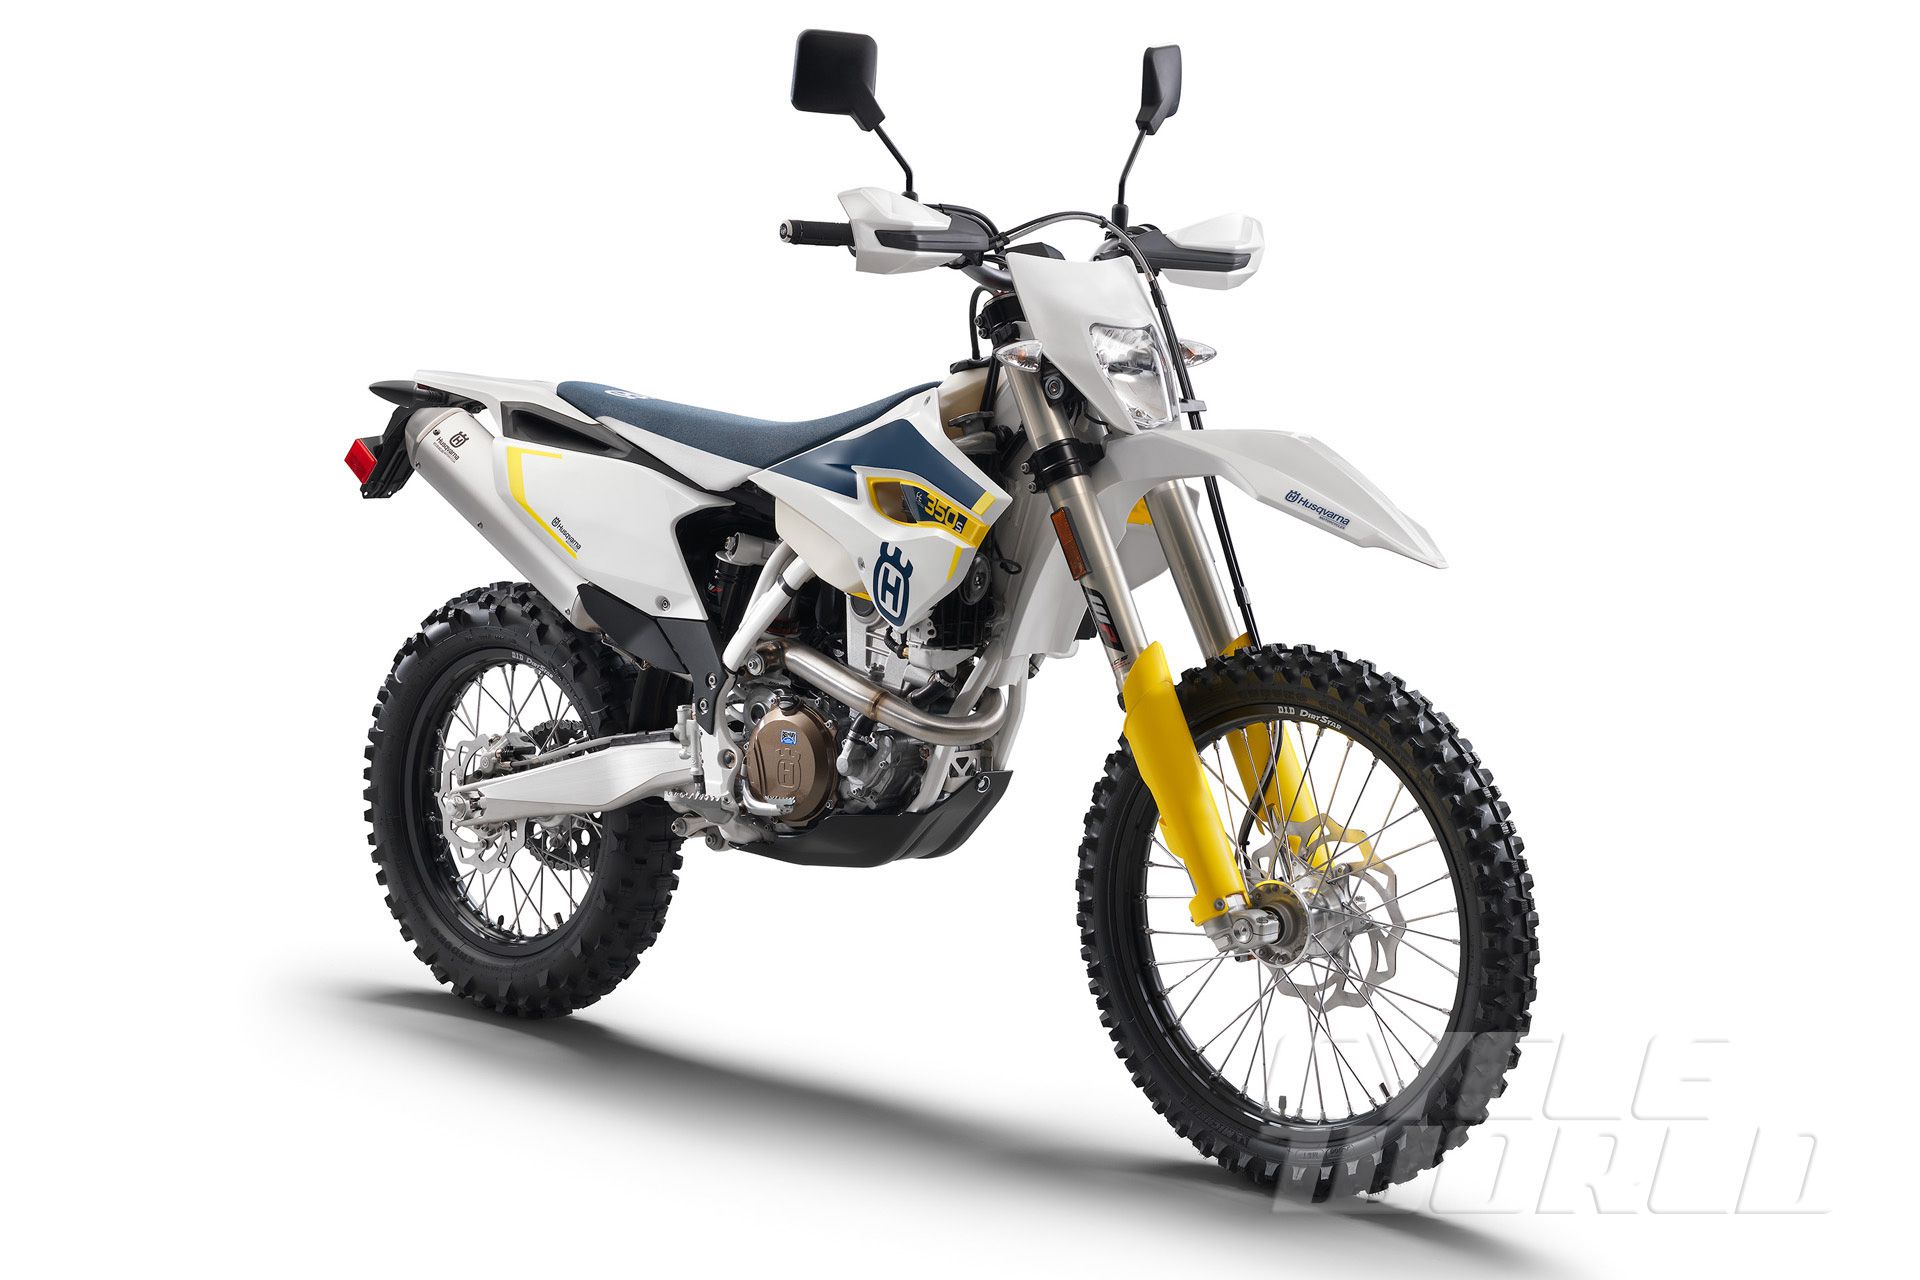 2015 Husqvarna Fe 350 S Fe 501 S First Look Review Photos Cycle World